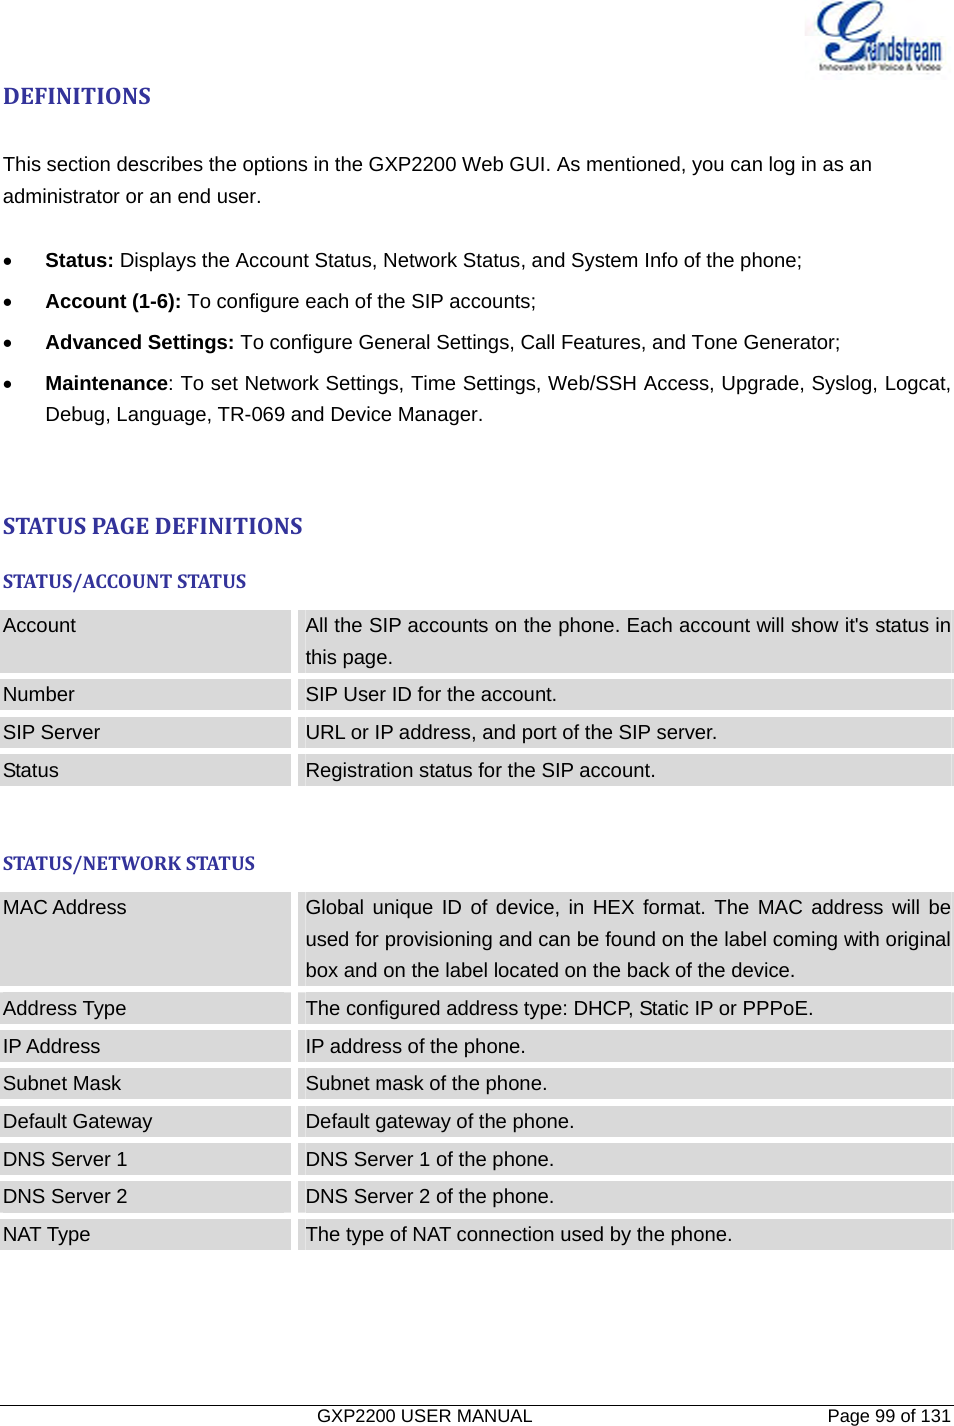   GXP2200 USER MANUAL       Page 99 of 131                                  DEFINITIONS This section describes the options in the GXP2200 Web GUI. As mentioned, you can log in as an administrator or an end user.  • Status: Displays the Account Status, Network Status, and System Info of the phone; • Account (1-6): To configure each of the SIP accounts; • Advanced Settings: To configure General Settings, Call Features, and Tone Generator; • Maintenance: To set Network Settings, Time Settings, Web/SSH Access, Upgrade, Syslog, Logcat, Debug, Language, TR-069 and Device Manager. STATUSPAGEDEFINITIONSSTATUS/ACCOUNTSTATUSAccount  All the SIP accounts on the phone. Each account will show it&apos;s status in this page. Number  SIP User ID for the account. SIP Server  URL or IP address, and port of the SIP server. Status  Registration status for the SIP account.  STATUS/NETWORKSTATUSMAC Address  Global unique ID of device, in HEX format. The MAC address will be used for provisioning and can be found on the label coming with original box and on the label located on the back of the device. Address Type  The configured address type: DHCP, Static IP or PPPoE. IP Address  IP address of the phone. Subnet Mask  Subnet mask of the phone. Default Gateway  Default gateway of the phone. DNS Server 1  DNS Server 1 of the phone. DNS Server 2  DNS Server 2 of the phone. NAT Type  The type of NAT connection used by the phone.  